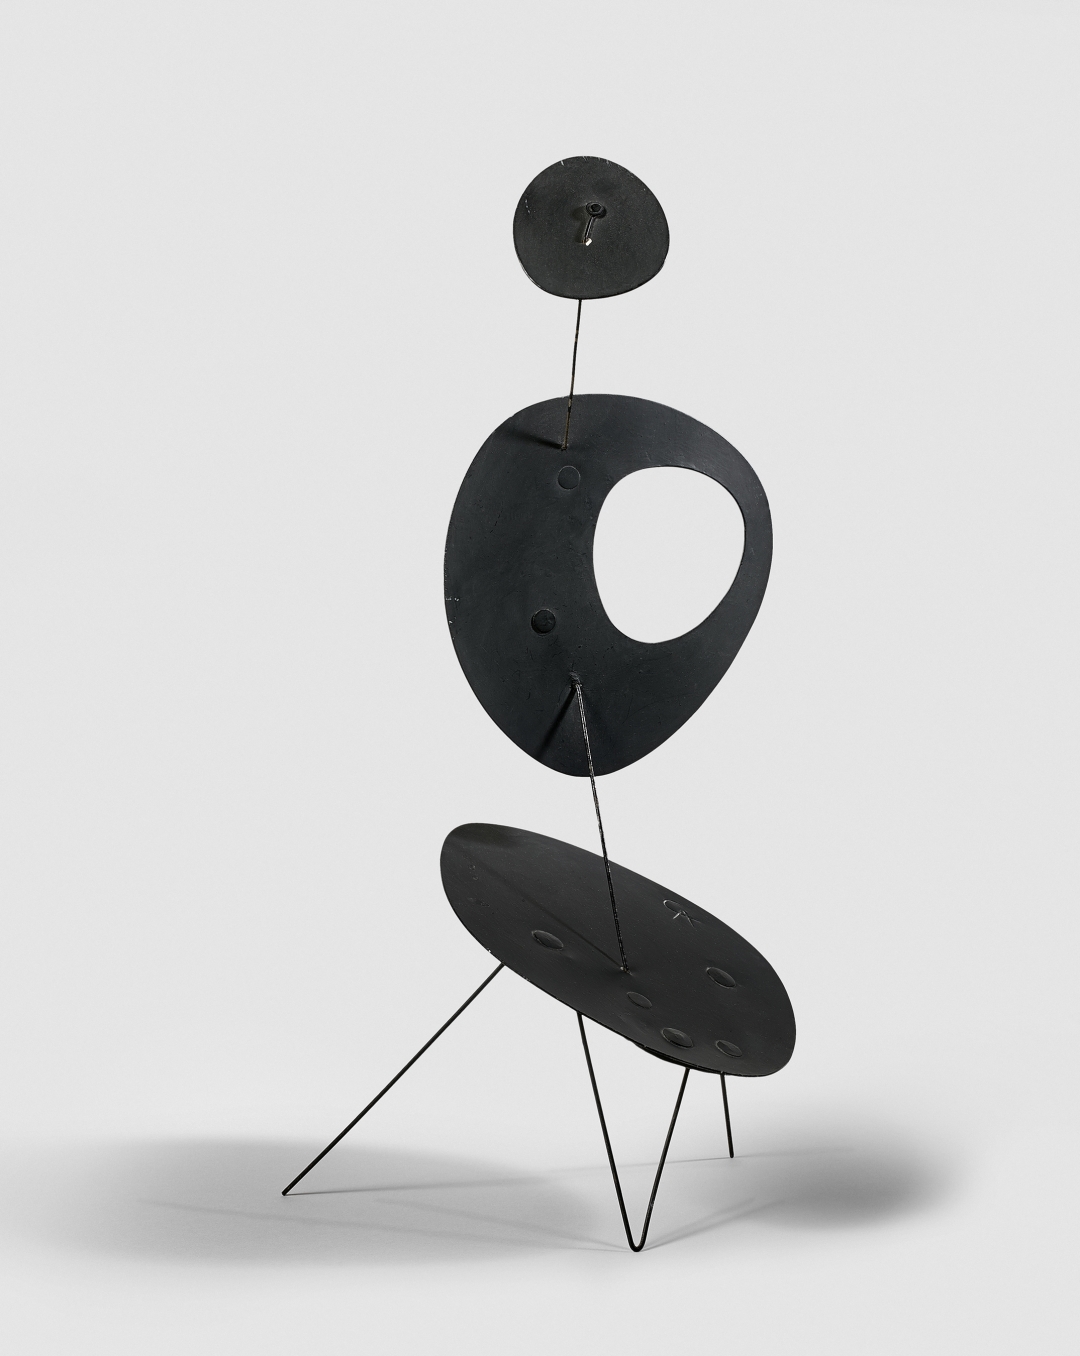 Alexander Calder, <i>Untitled</i>, 1954, Sheet  metal,  wire  and  paint, 17 3/4 x 8 1/4 x 7 1/2 in. (45 x 21 x 19 cm), Available